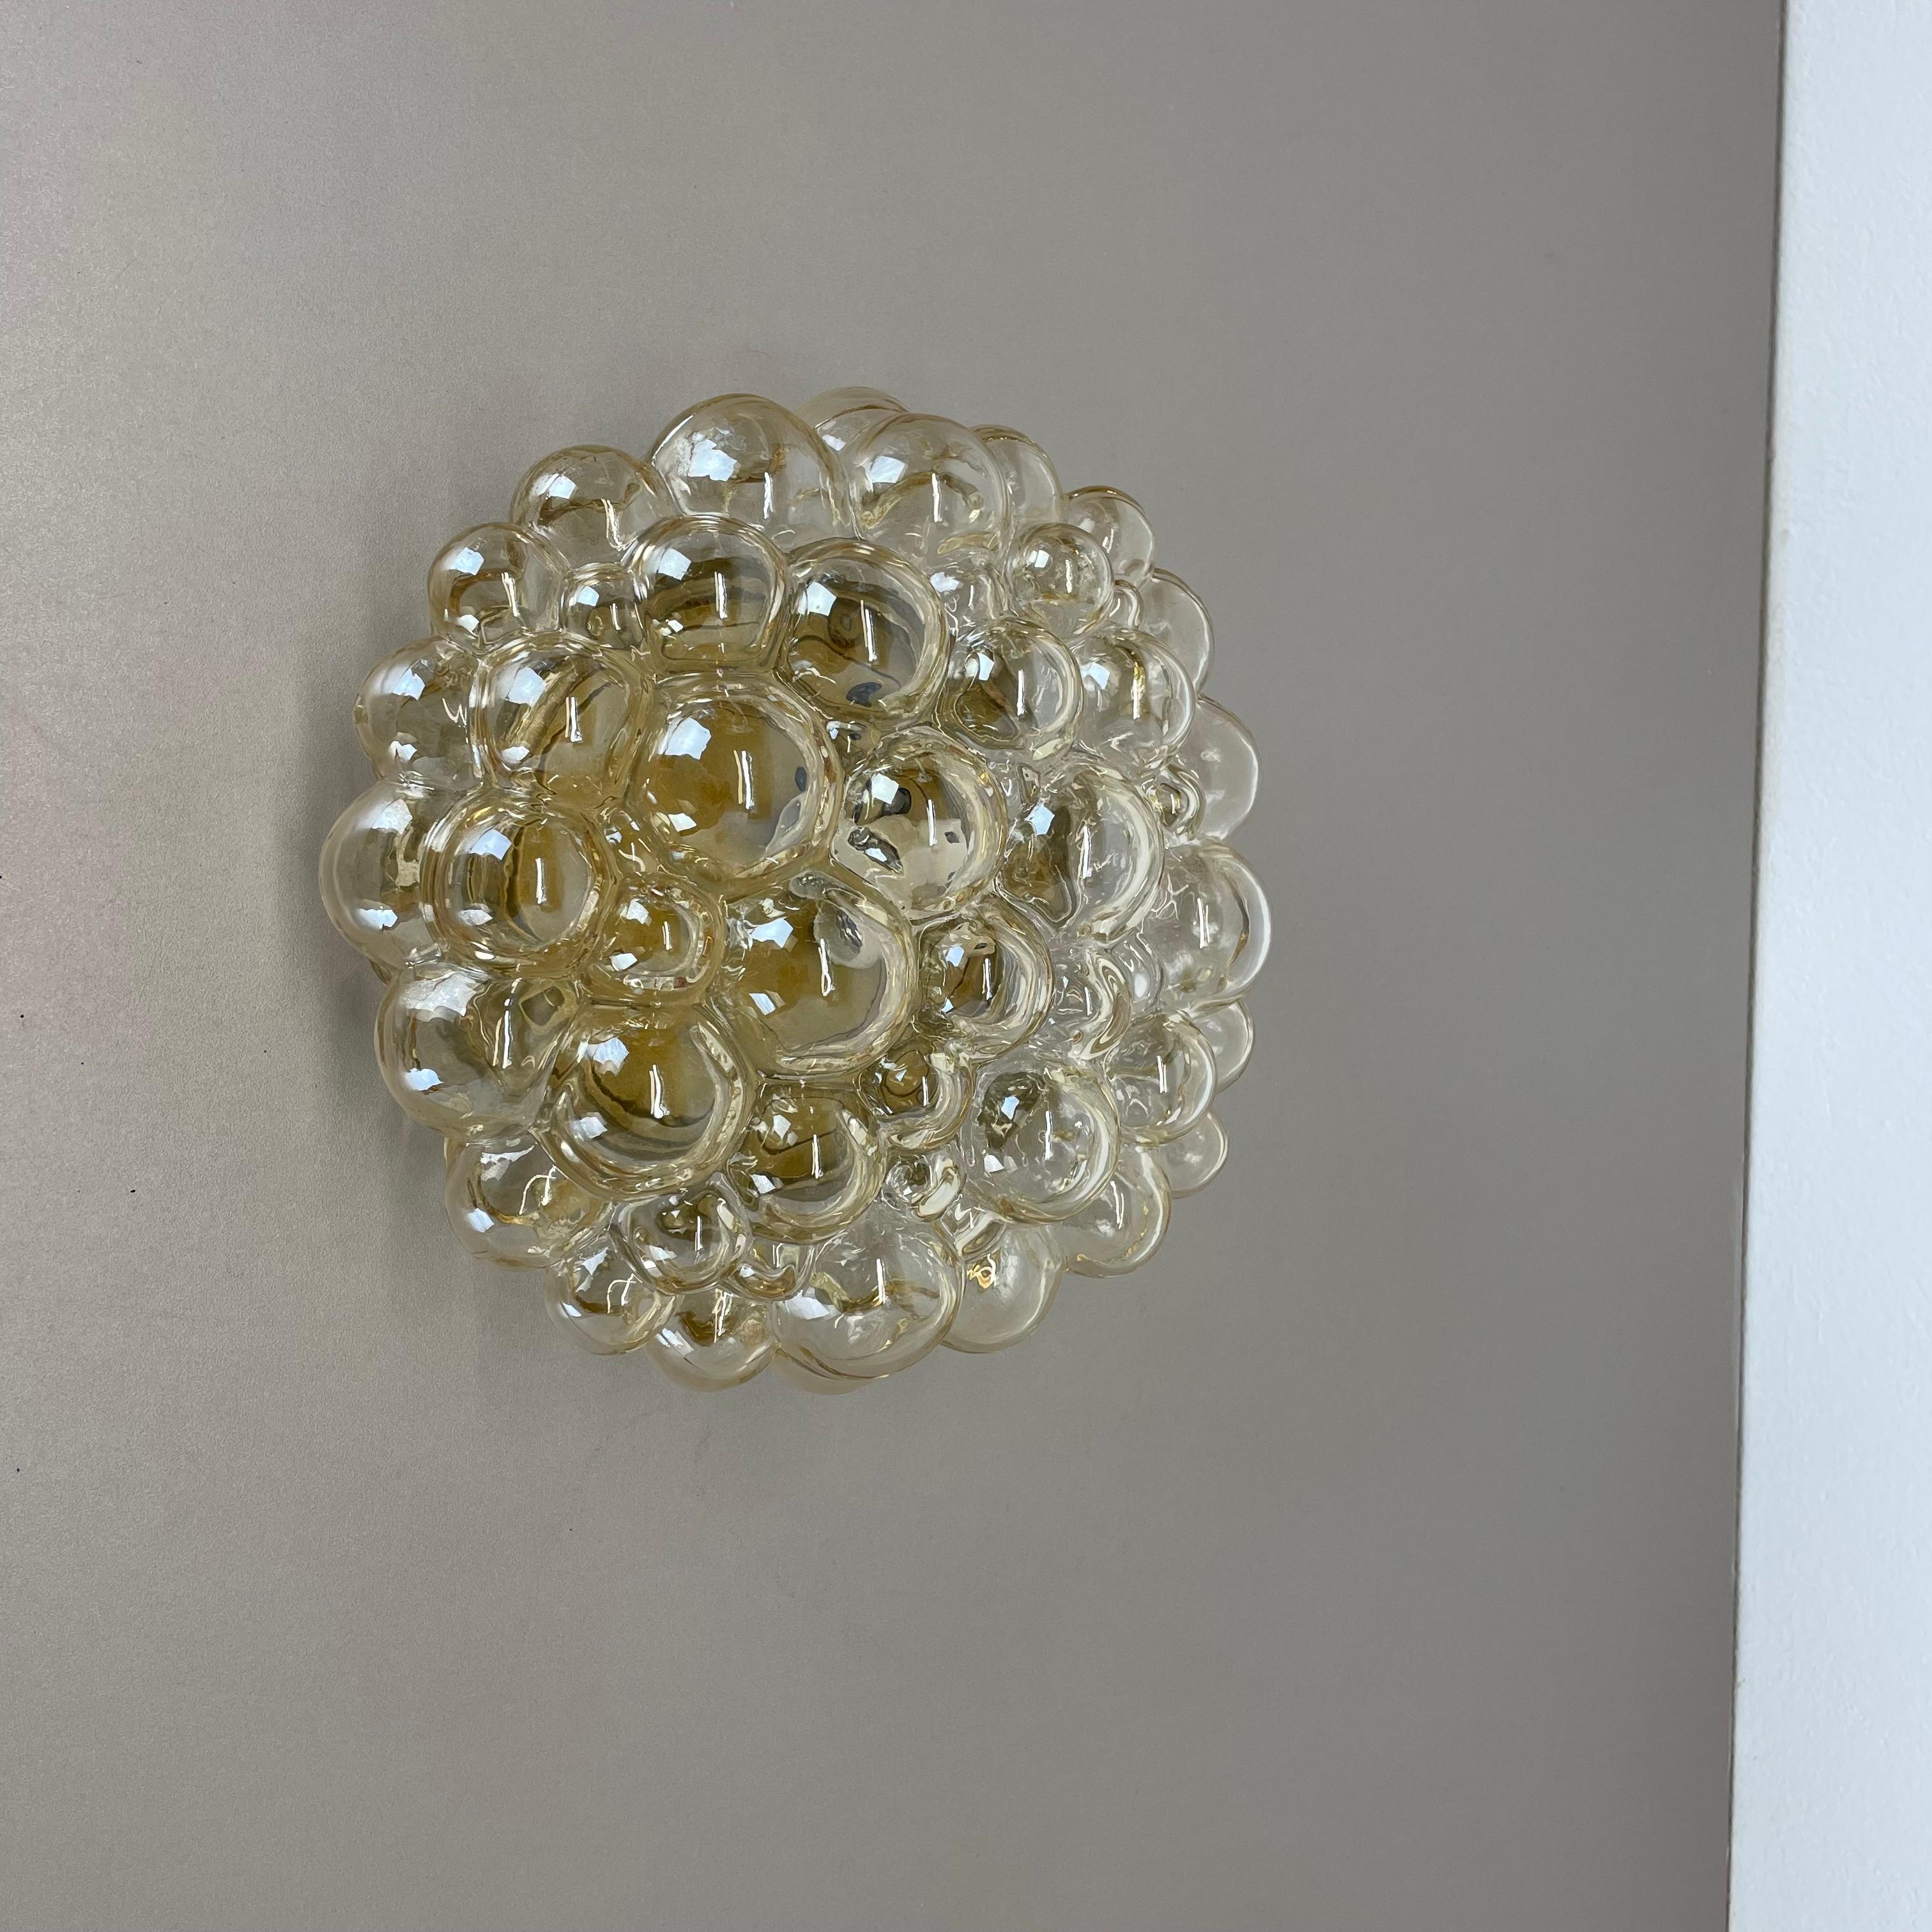 Article:

wall light  ceiling light



Producer: 

Glashütte Limburg, Germany


Design:

Helena Tynell


Origin: 

Germany


Age: 

1960s





This fantastic glass wall  ceiling light was designed by Helena Tynell and produced in 1960s in Germany by